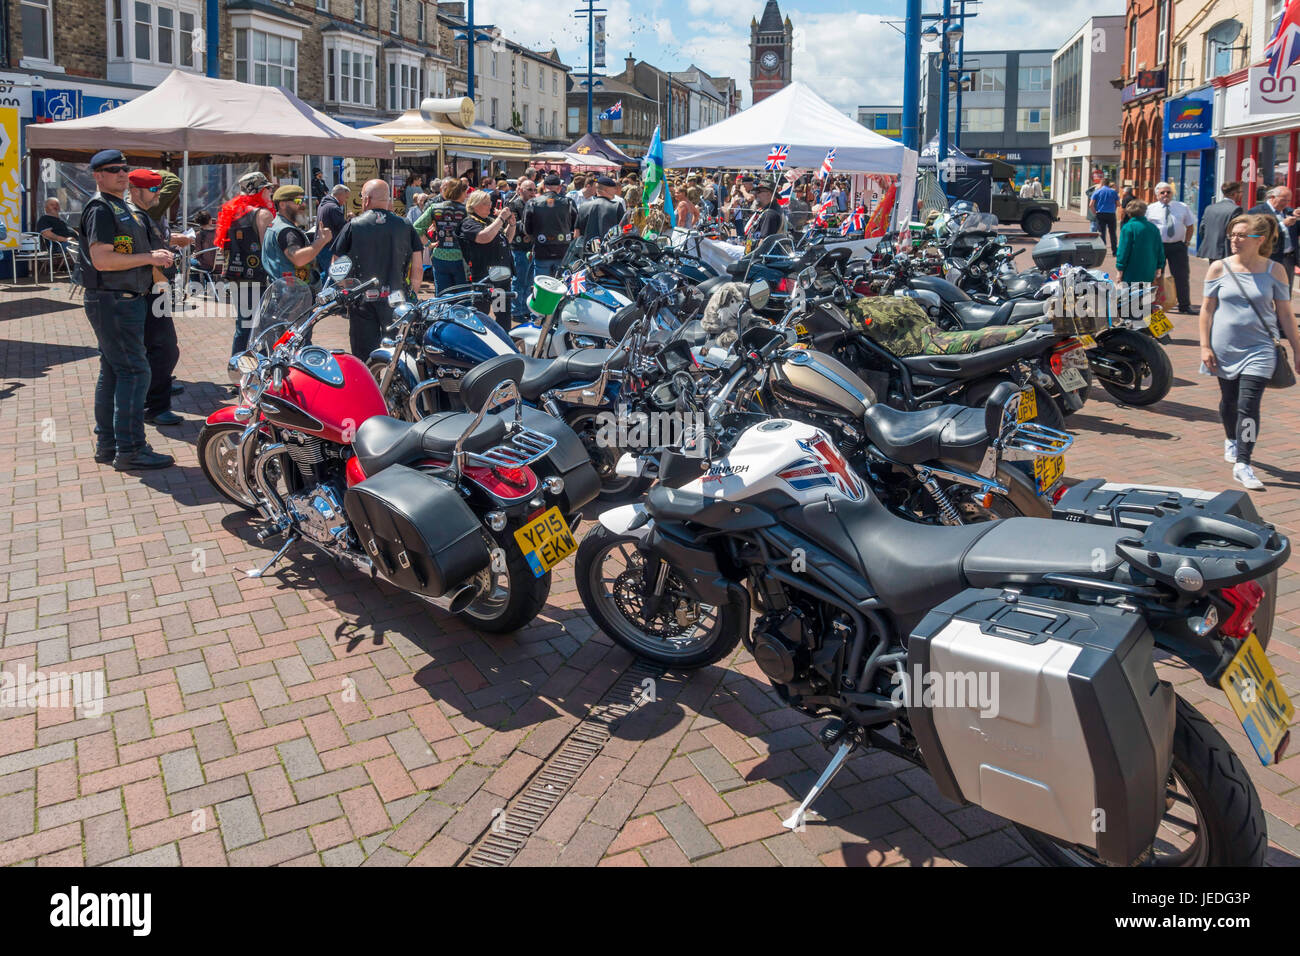 Redcar Cleveland North Yorkshire 24 June 2017:  Armed Forces Day was celebrated country wide today with events to show support for the serving and veteran armed forces and their families.  In addition to parades, in Redcar there was a meeting of the AFB Armed Forces Bikers a registered charity which displays and rides their Motor Cycles to raise money for Military Charities. Credit: Peter Jordan NE/Alamy Live News Stock Photo